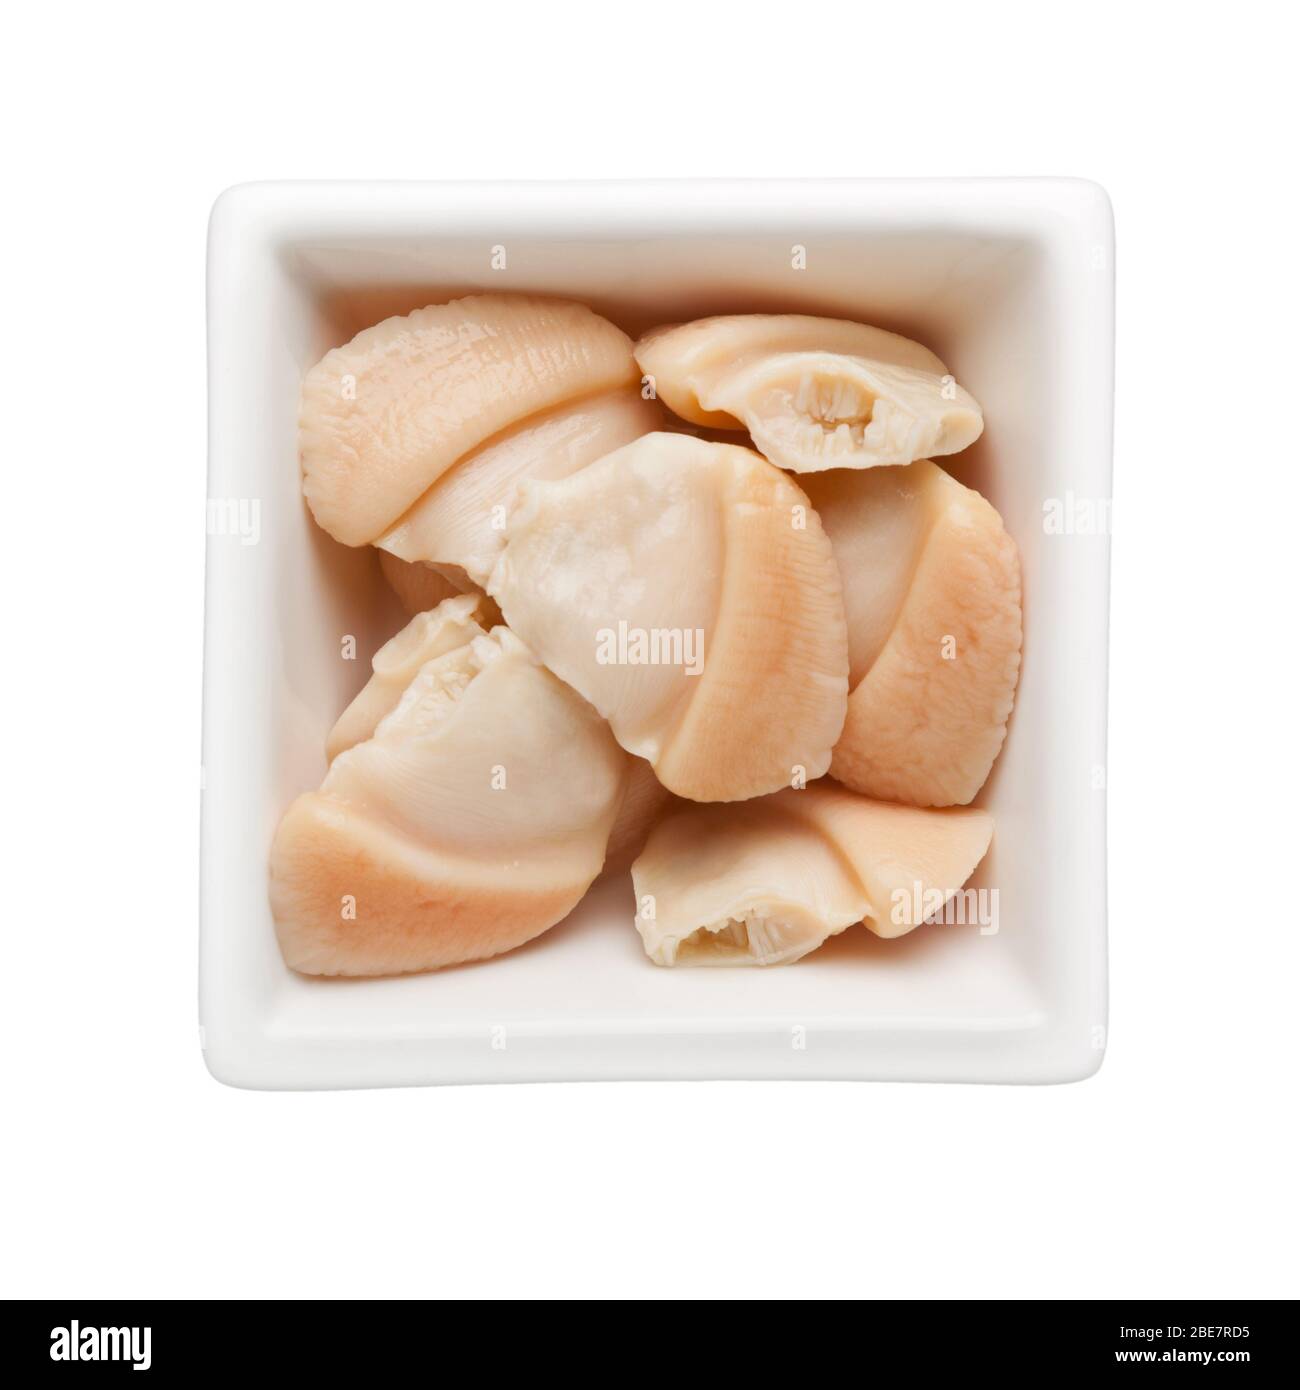 Canned clams in a square bowl isolated on white background Stock Photo